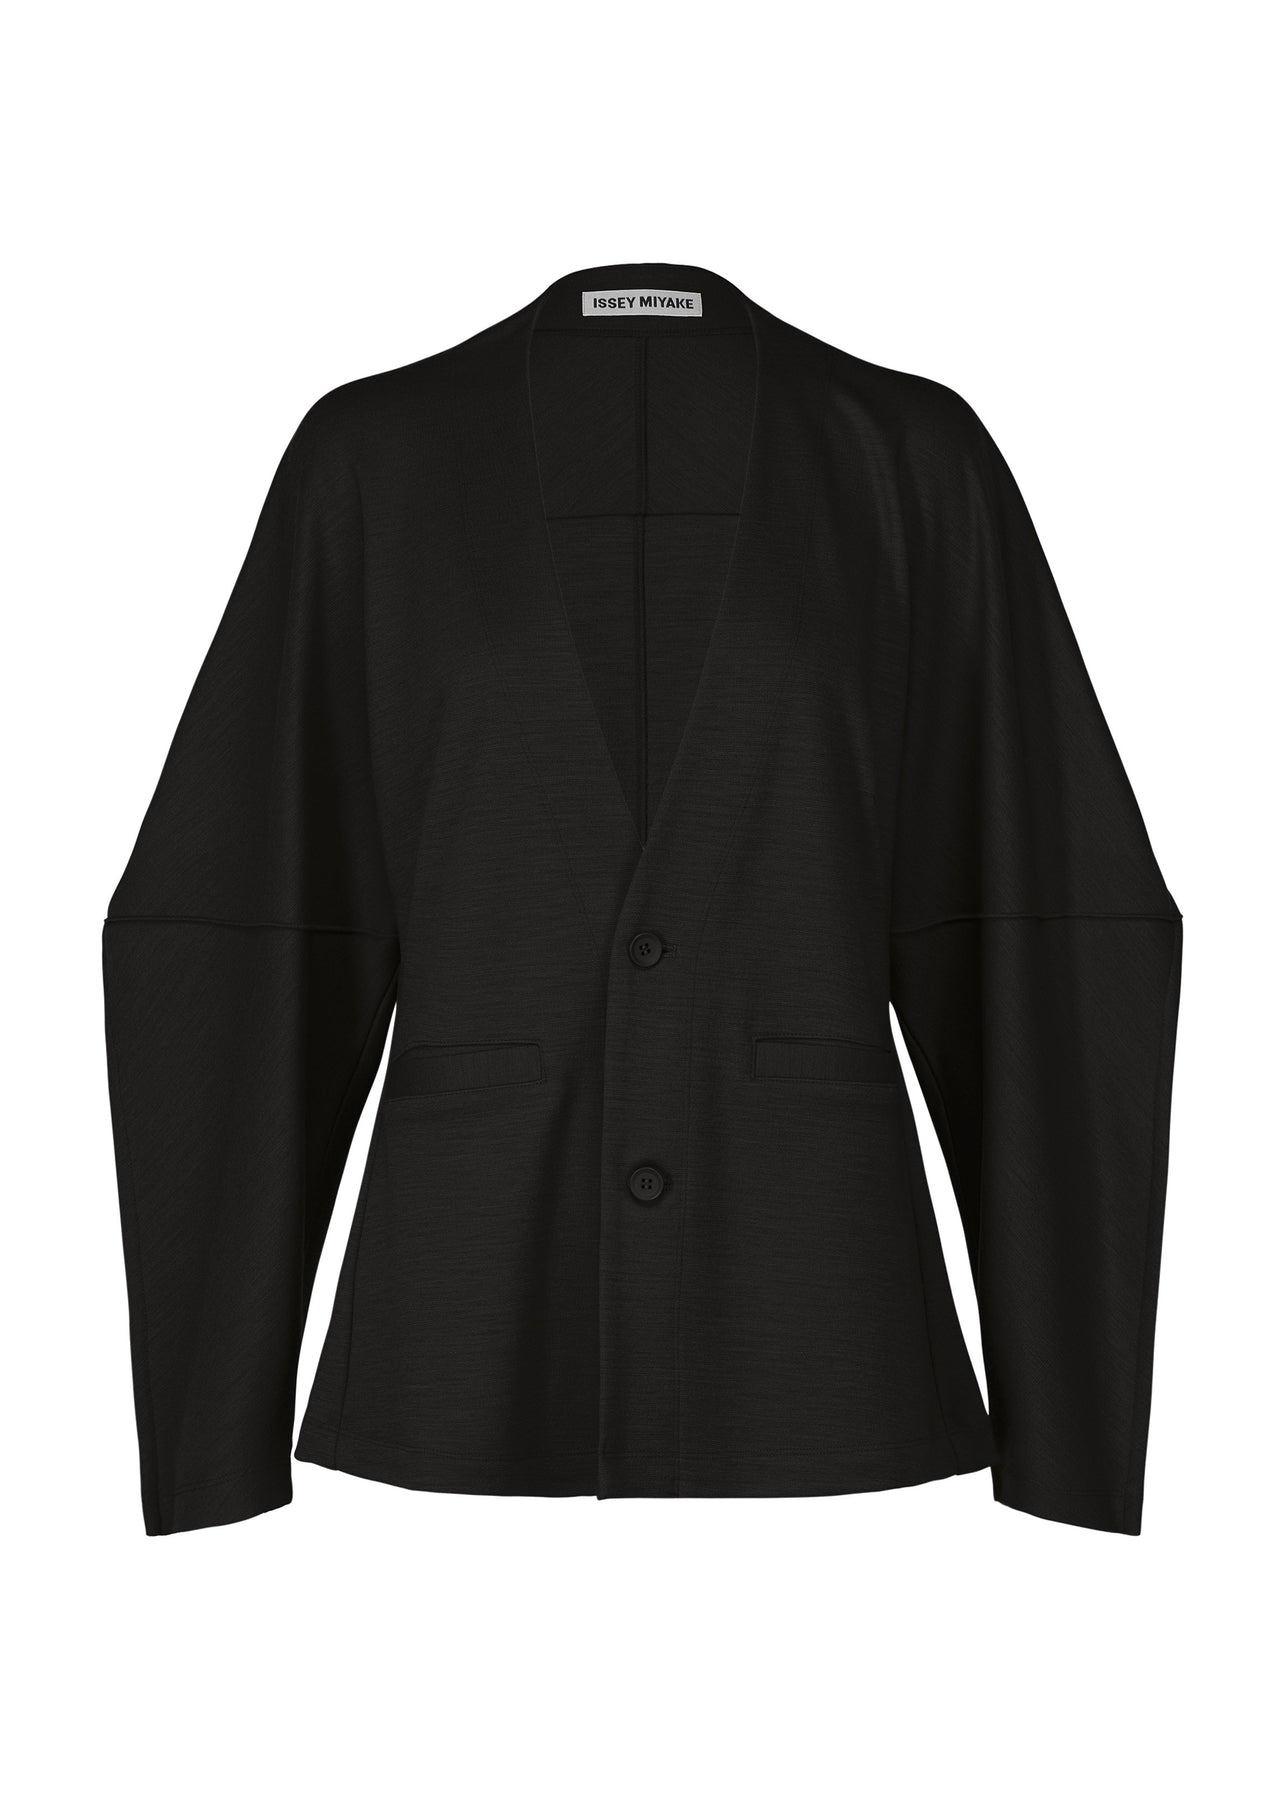 TUCKED WOOL JERSEY CARDIGAN | The official ISSEY MIYAKE ONLINE